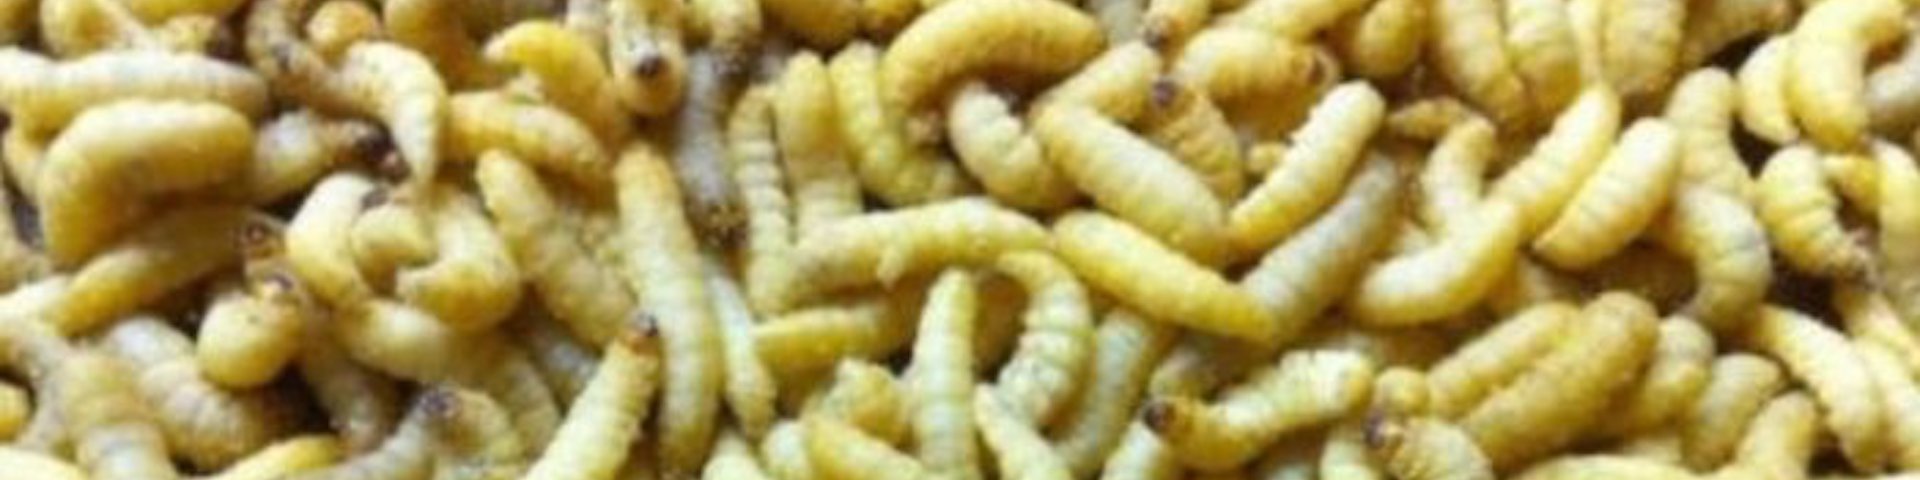 download wax worms near me